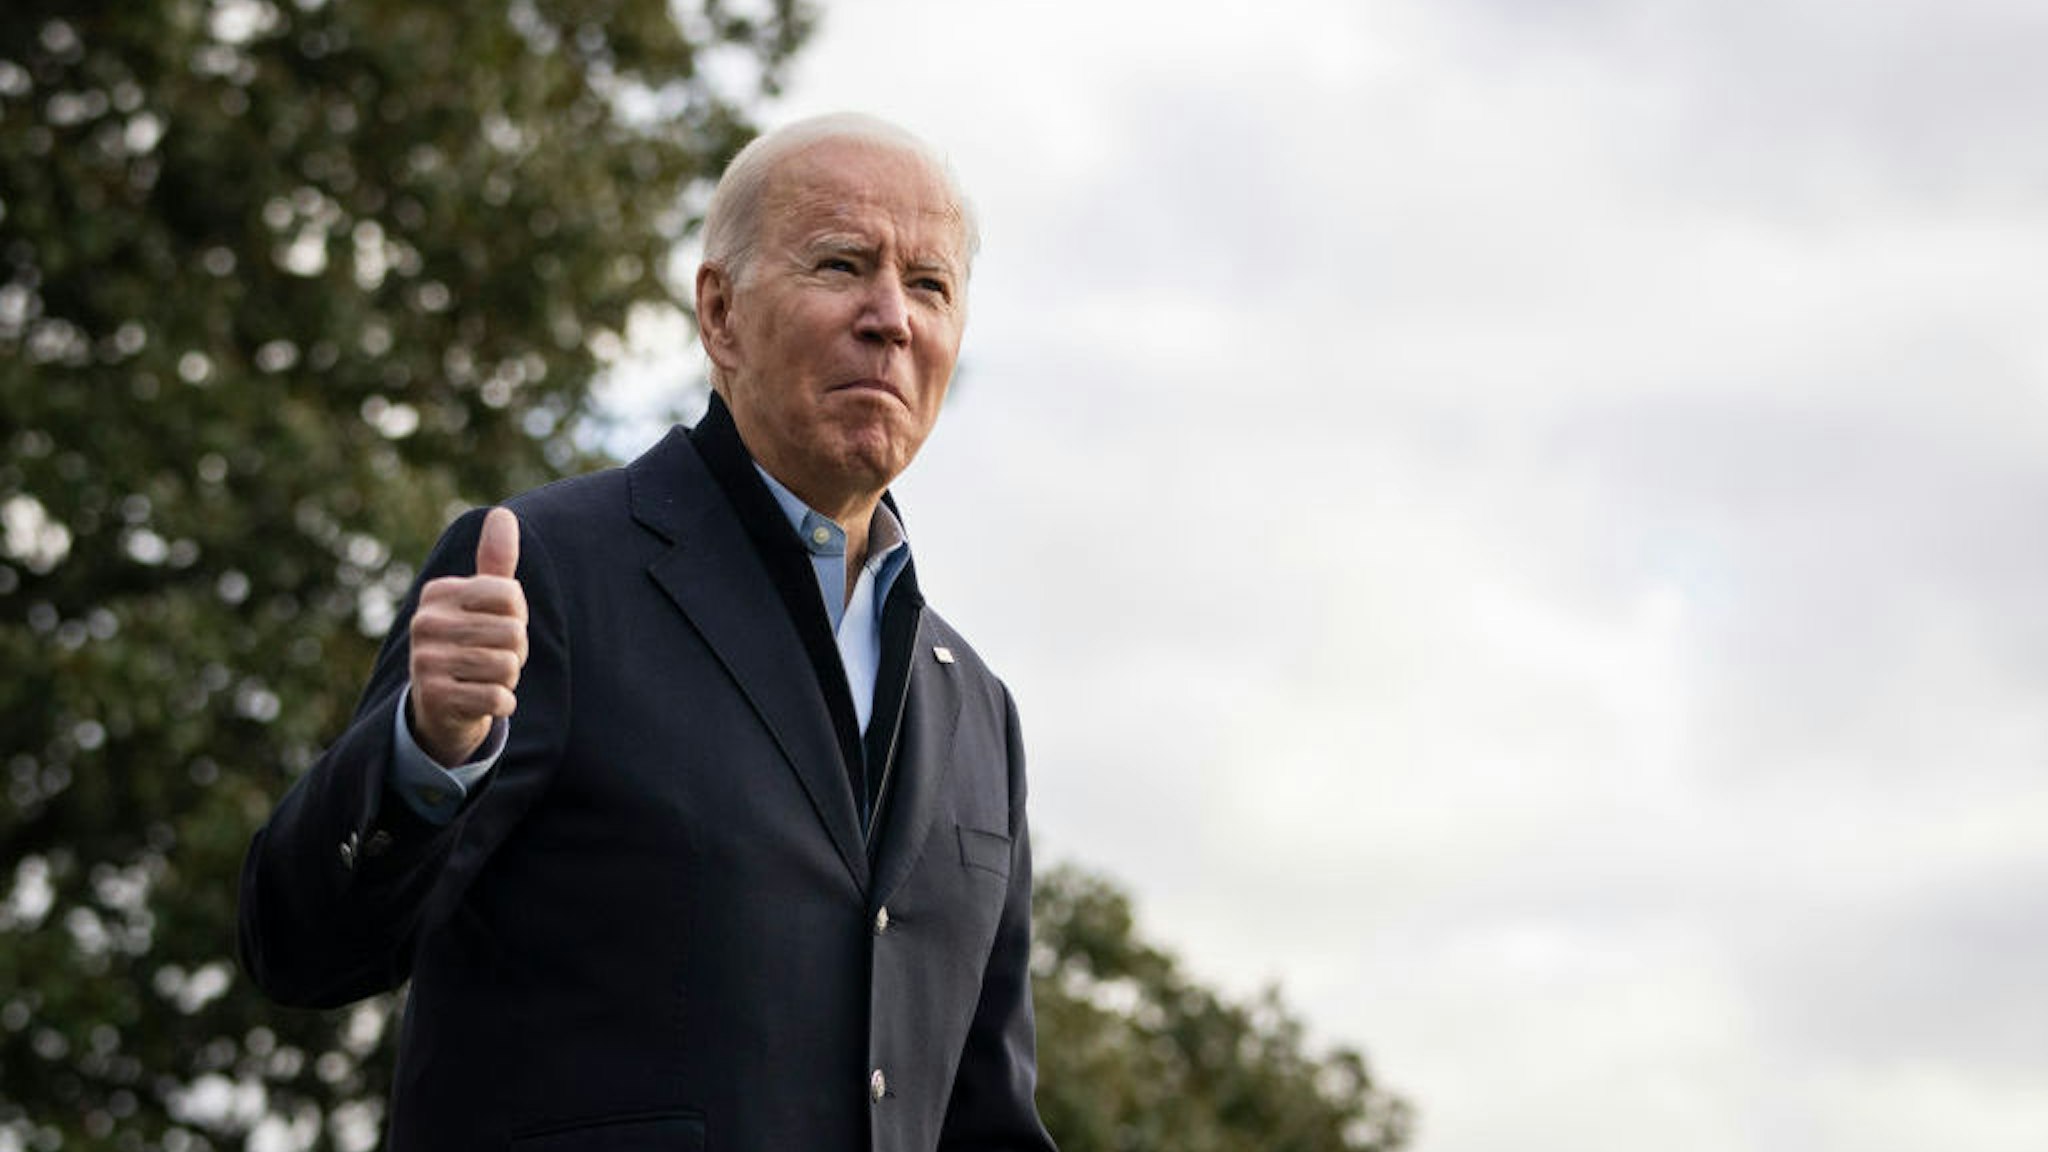 WASHINGTON, DC - DECEMBER 15: U.S. President Joe Biden gives a thumbs up after speaking to reporters as he walks to Marine One on the South Lawn of the White House December 15, 2021 in Washington, DC. President Biden is traveling to Kentucky on Wednesday, where he will visit some of the towns hit hardest by the recent deadly tornados that struck the region. (Photo by Drew Angerer/Getty Images)